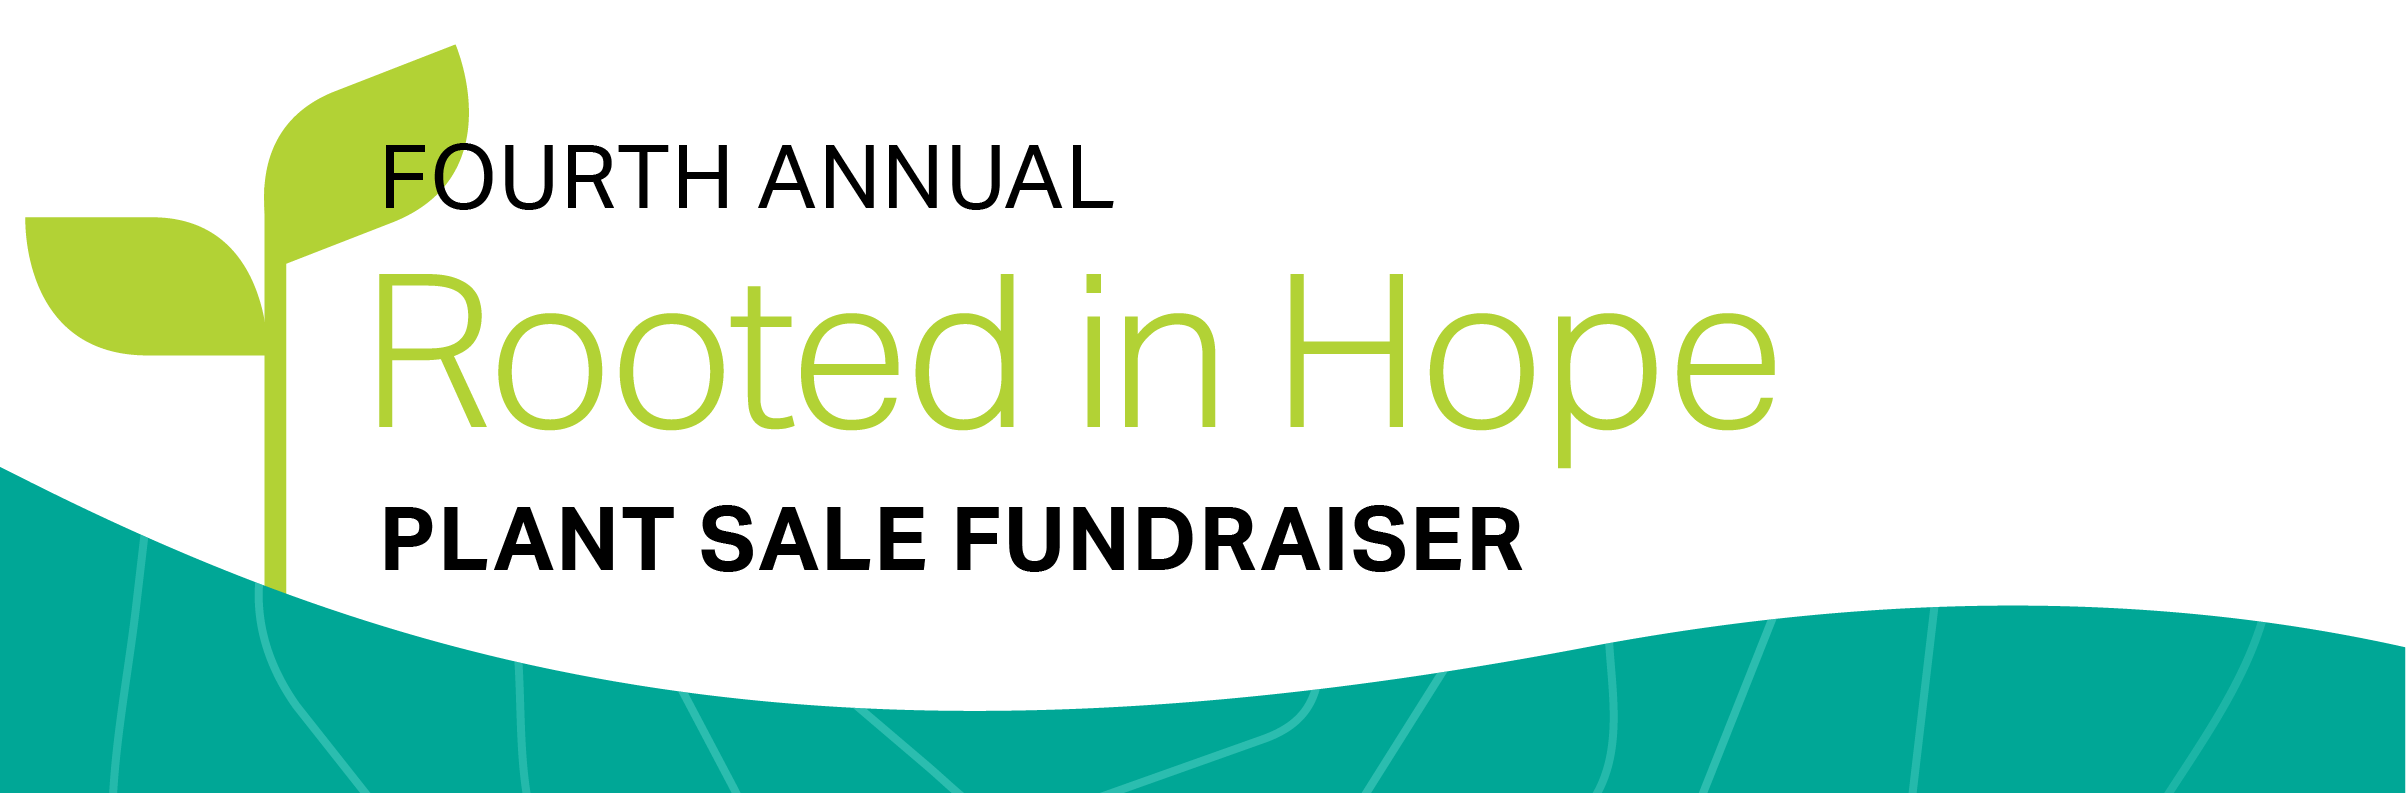 Fourth Annual Rooted in Hope Plant sale fundraiser